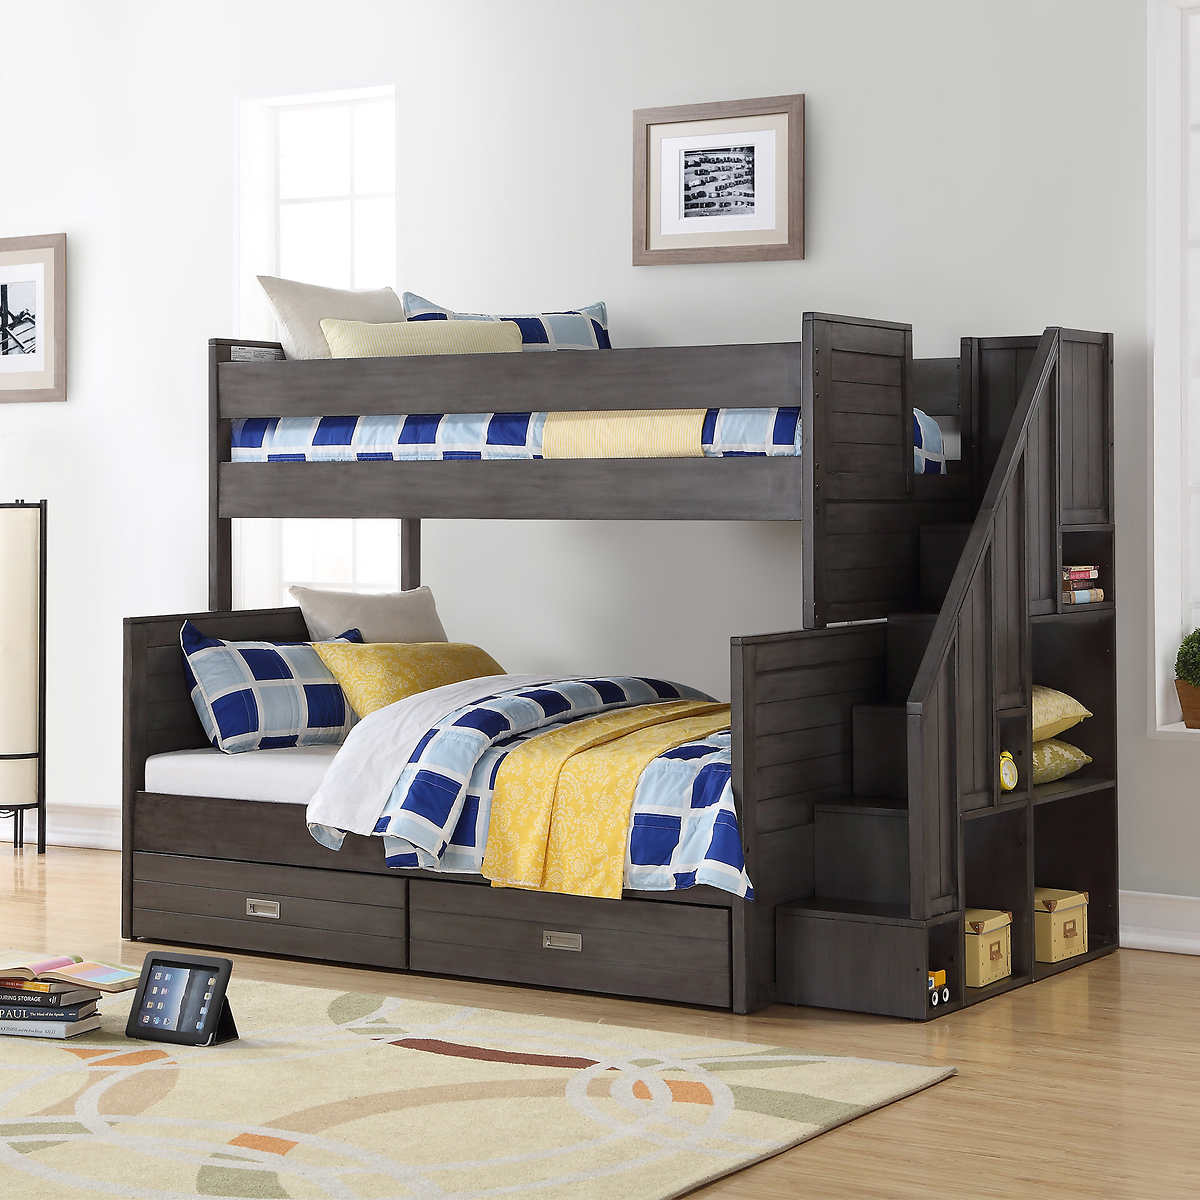 Caramia Kids Dylan Twin Over Full Bunk, Childrens Bunk Beds With Shelves